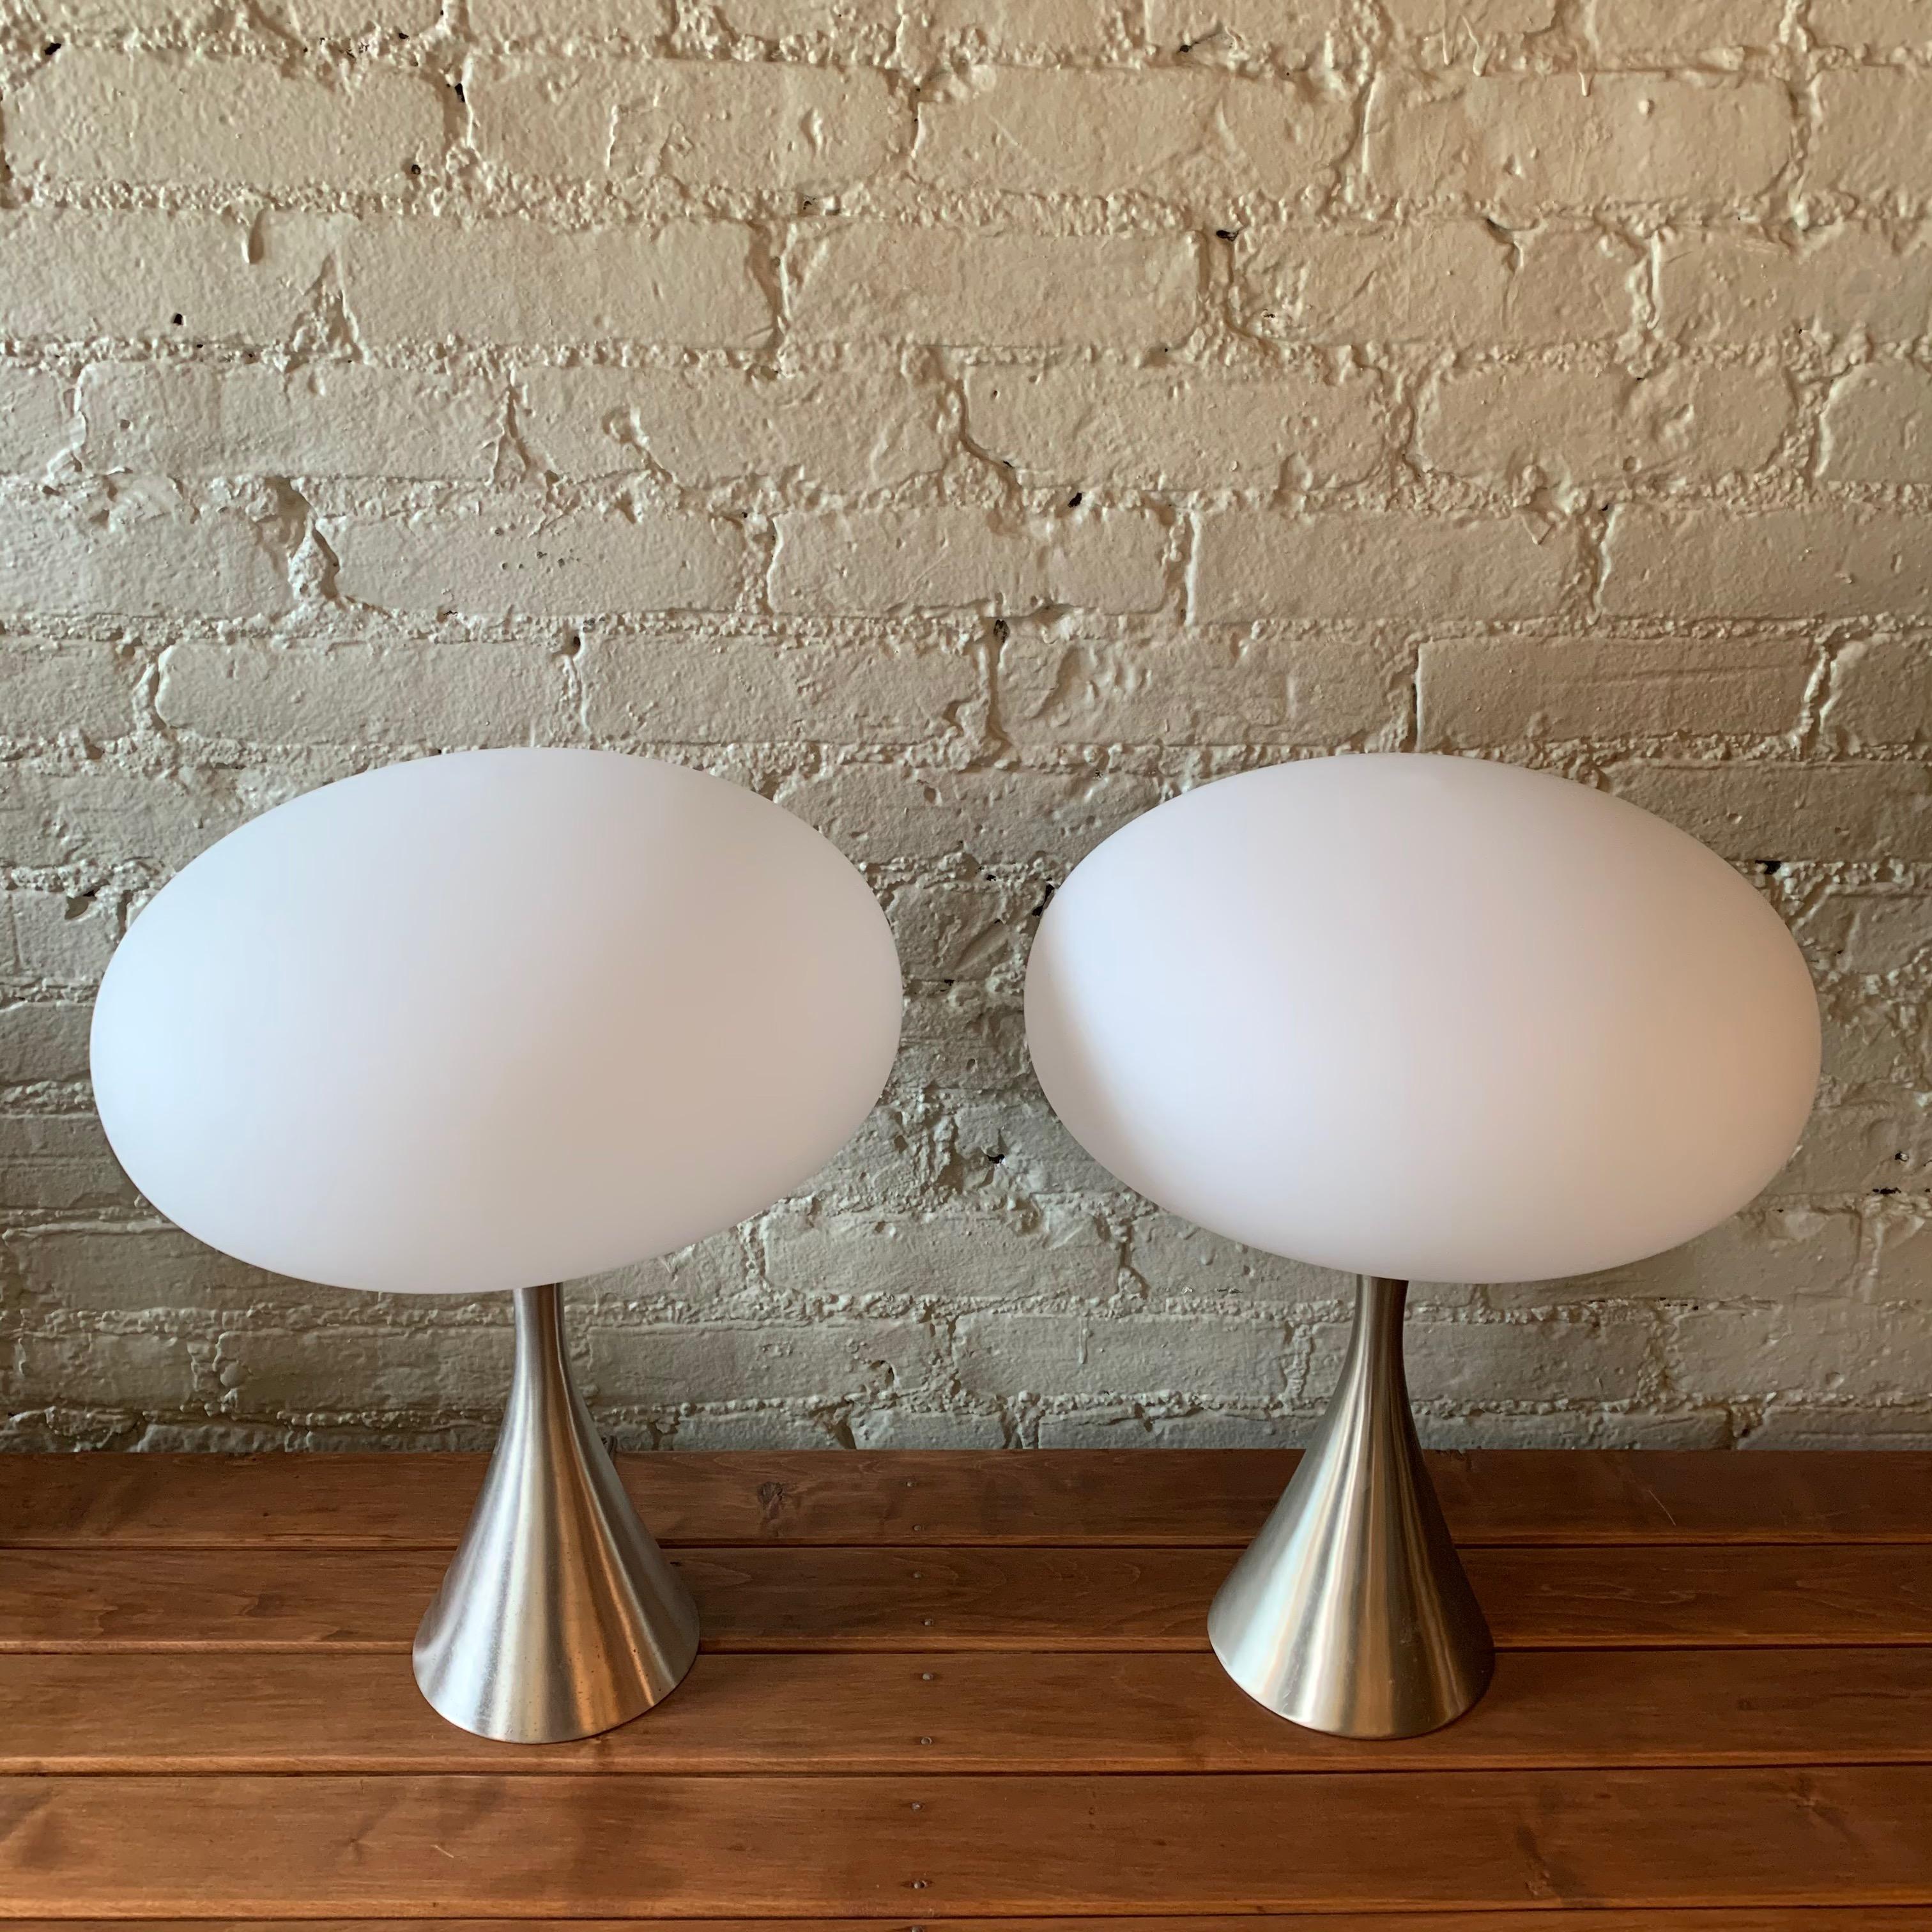 20th Century Pair of Brushed Aluminum Mushroom Table Lamps by Bill Curry for Laurel